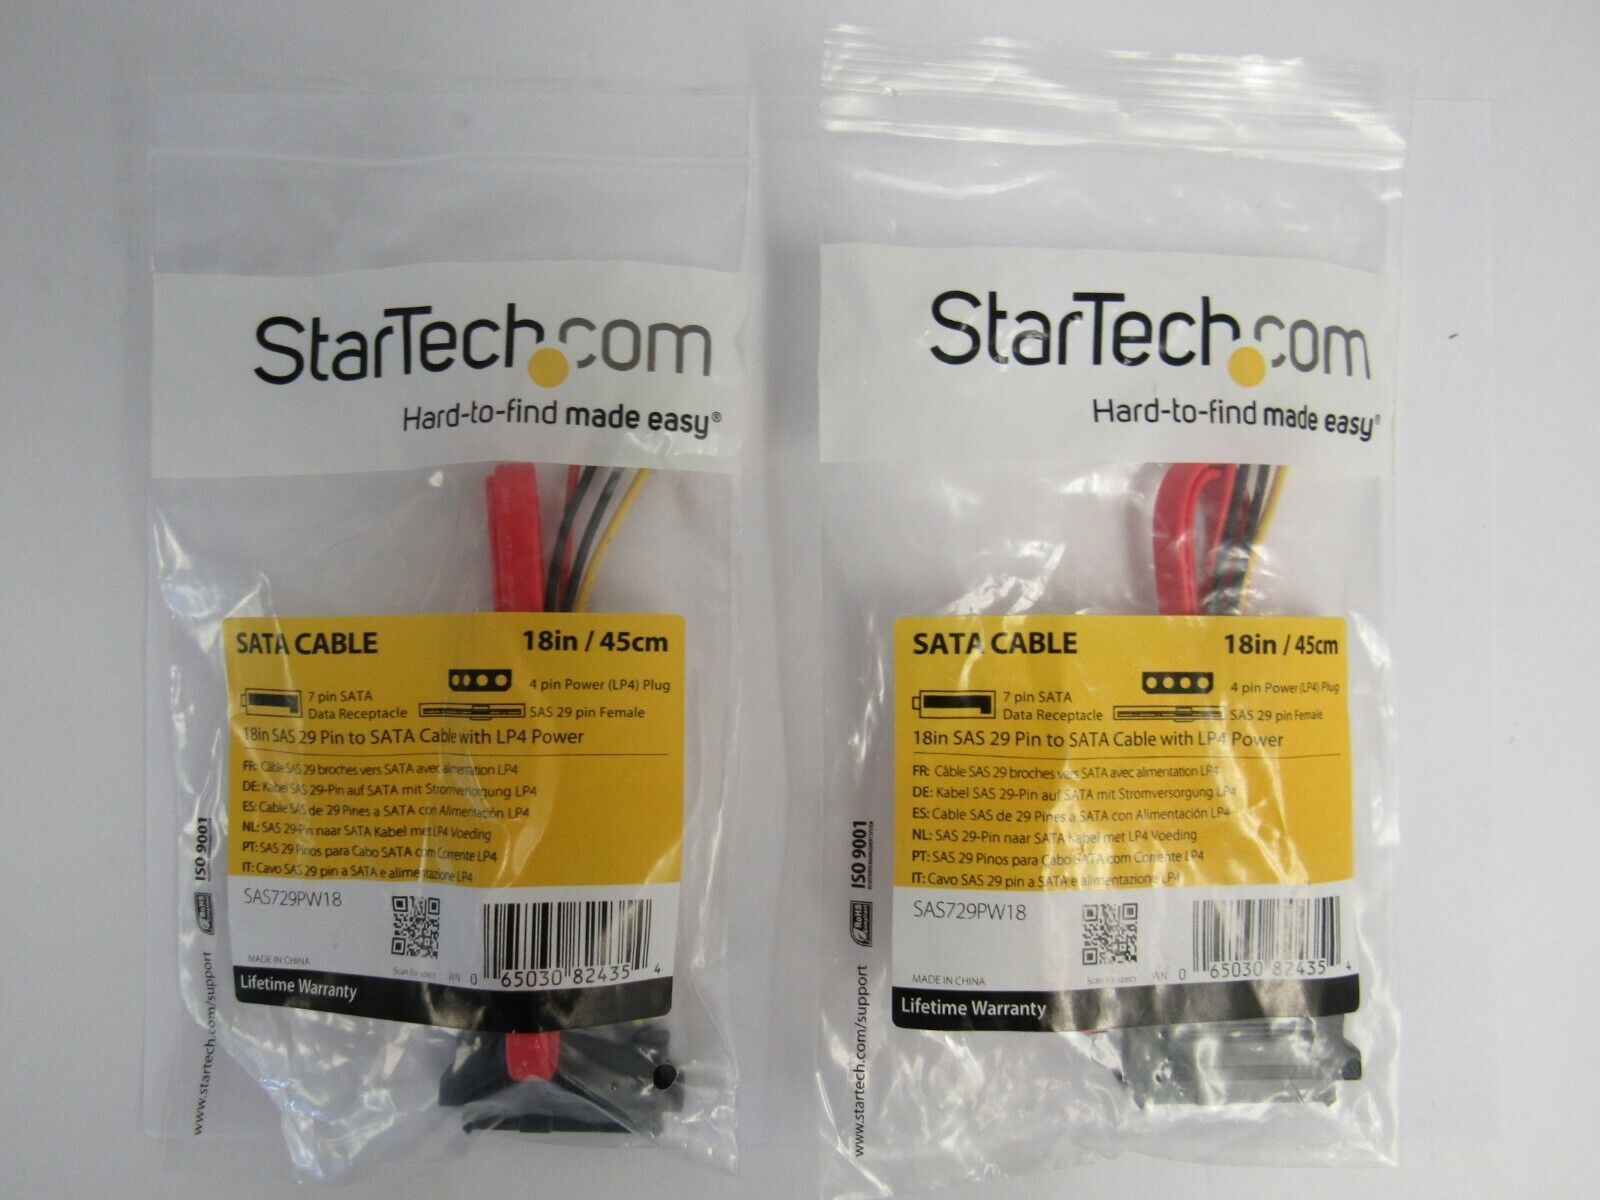 StarTech (Lot of 2) SAS729PW18 Sata Cable 18in /45cm 18-1 - $37.99